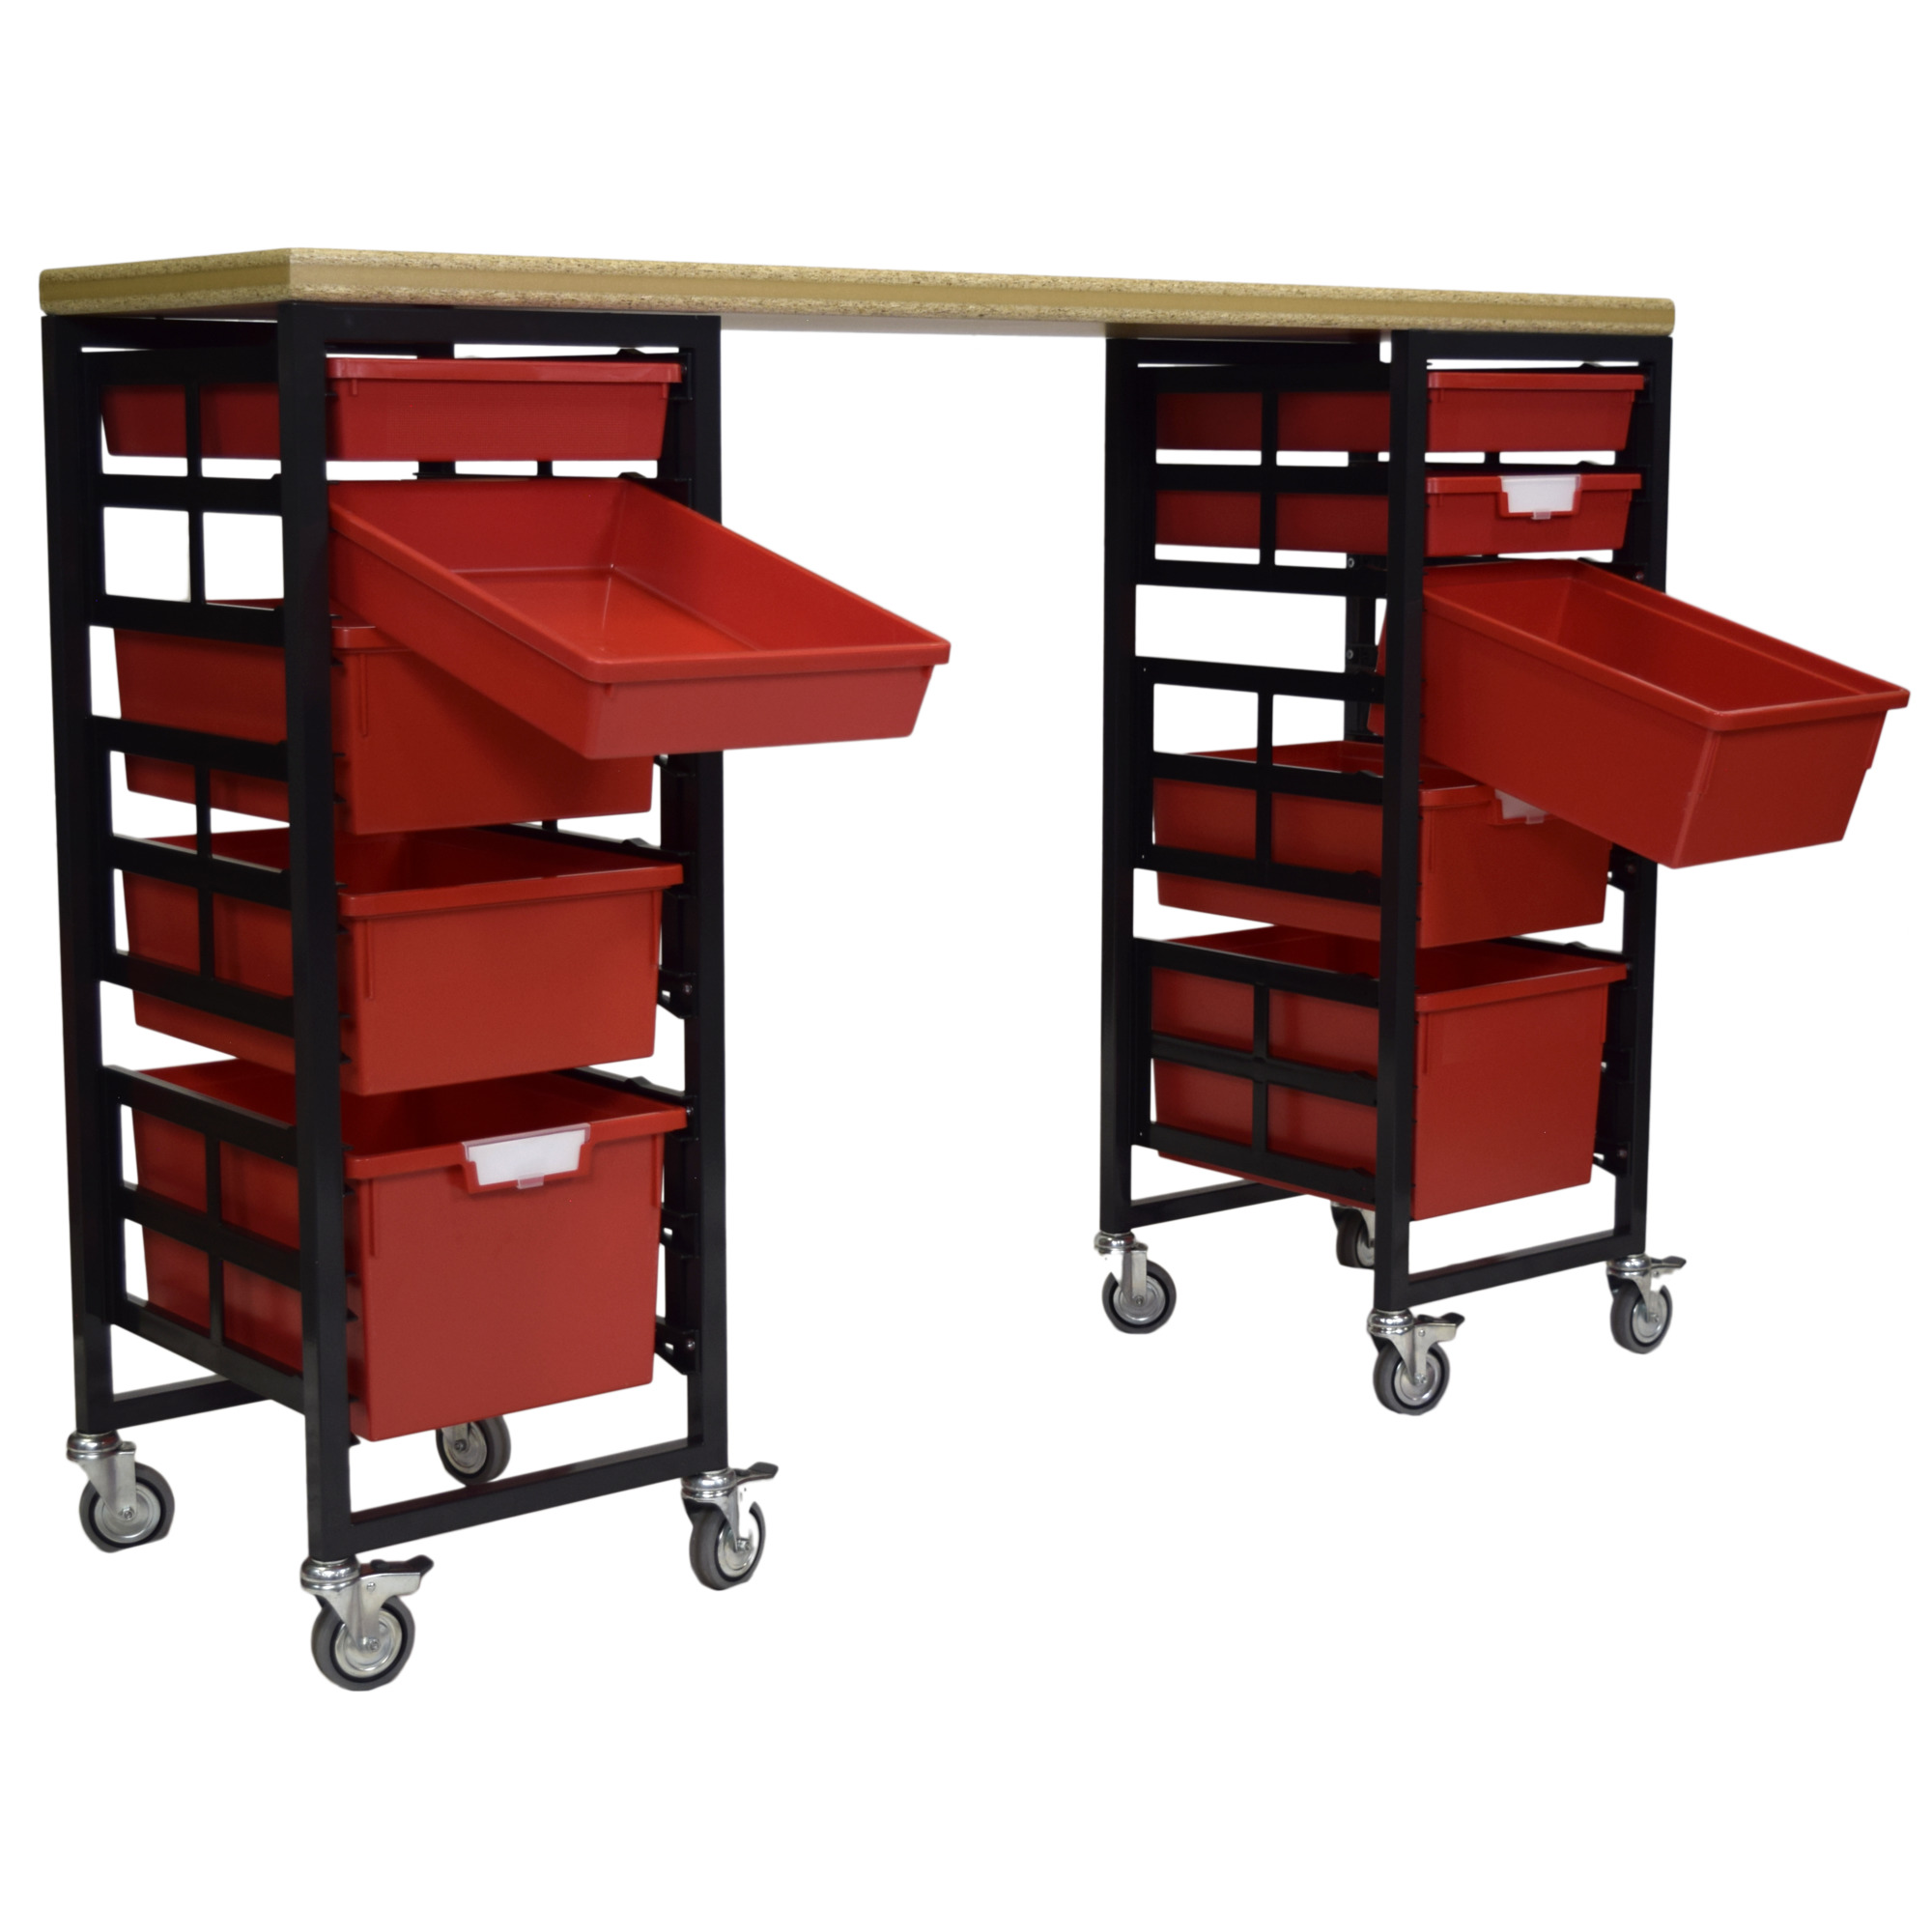 Certwood StorWerks, Mobile Workbench Station w/Wood Top -10 Trays-Red, Included (qty.) 10, Material Plastic, Height 6 in, Model CE2097DGGC-WB4S4D2TPR